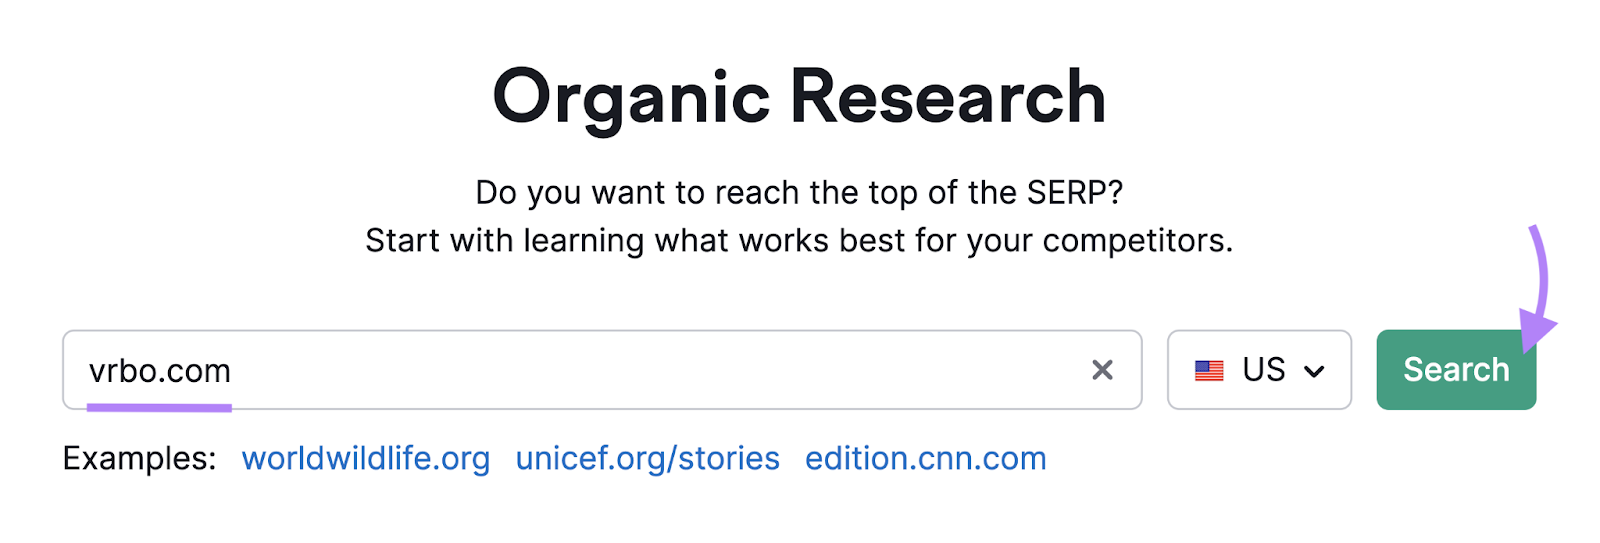 "vrbo.com" entered into the Organic Research instrumentality   hunt  bar